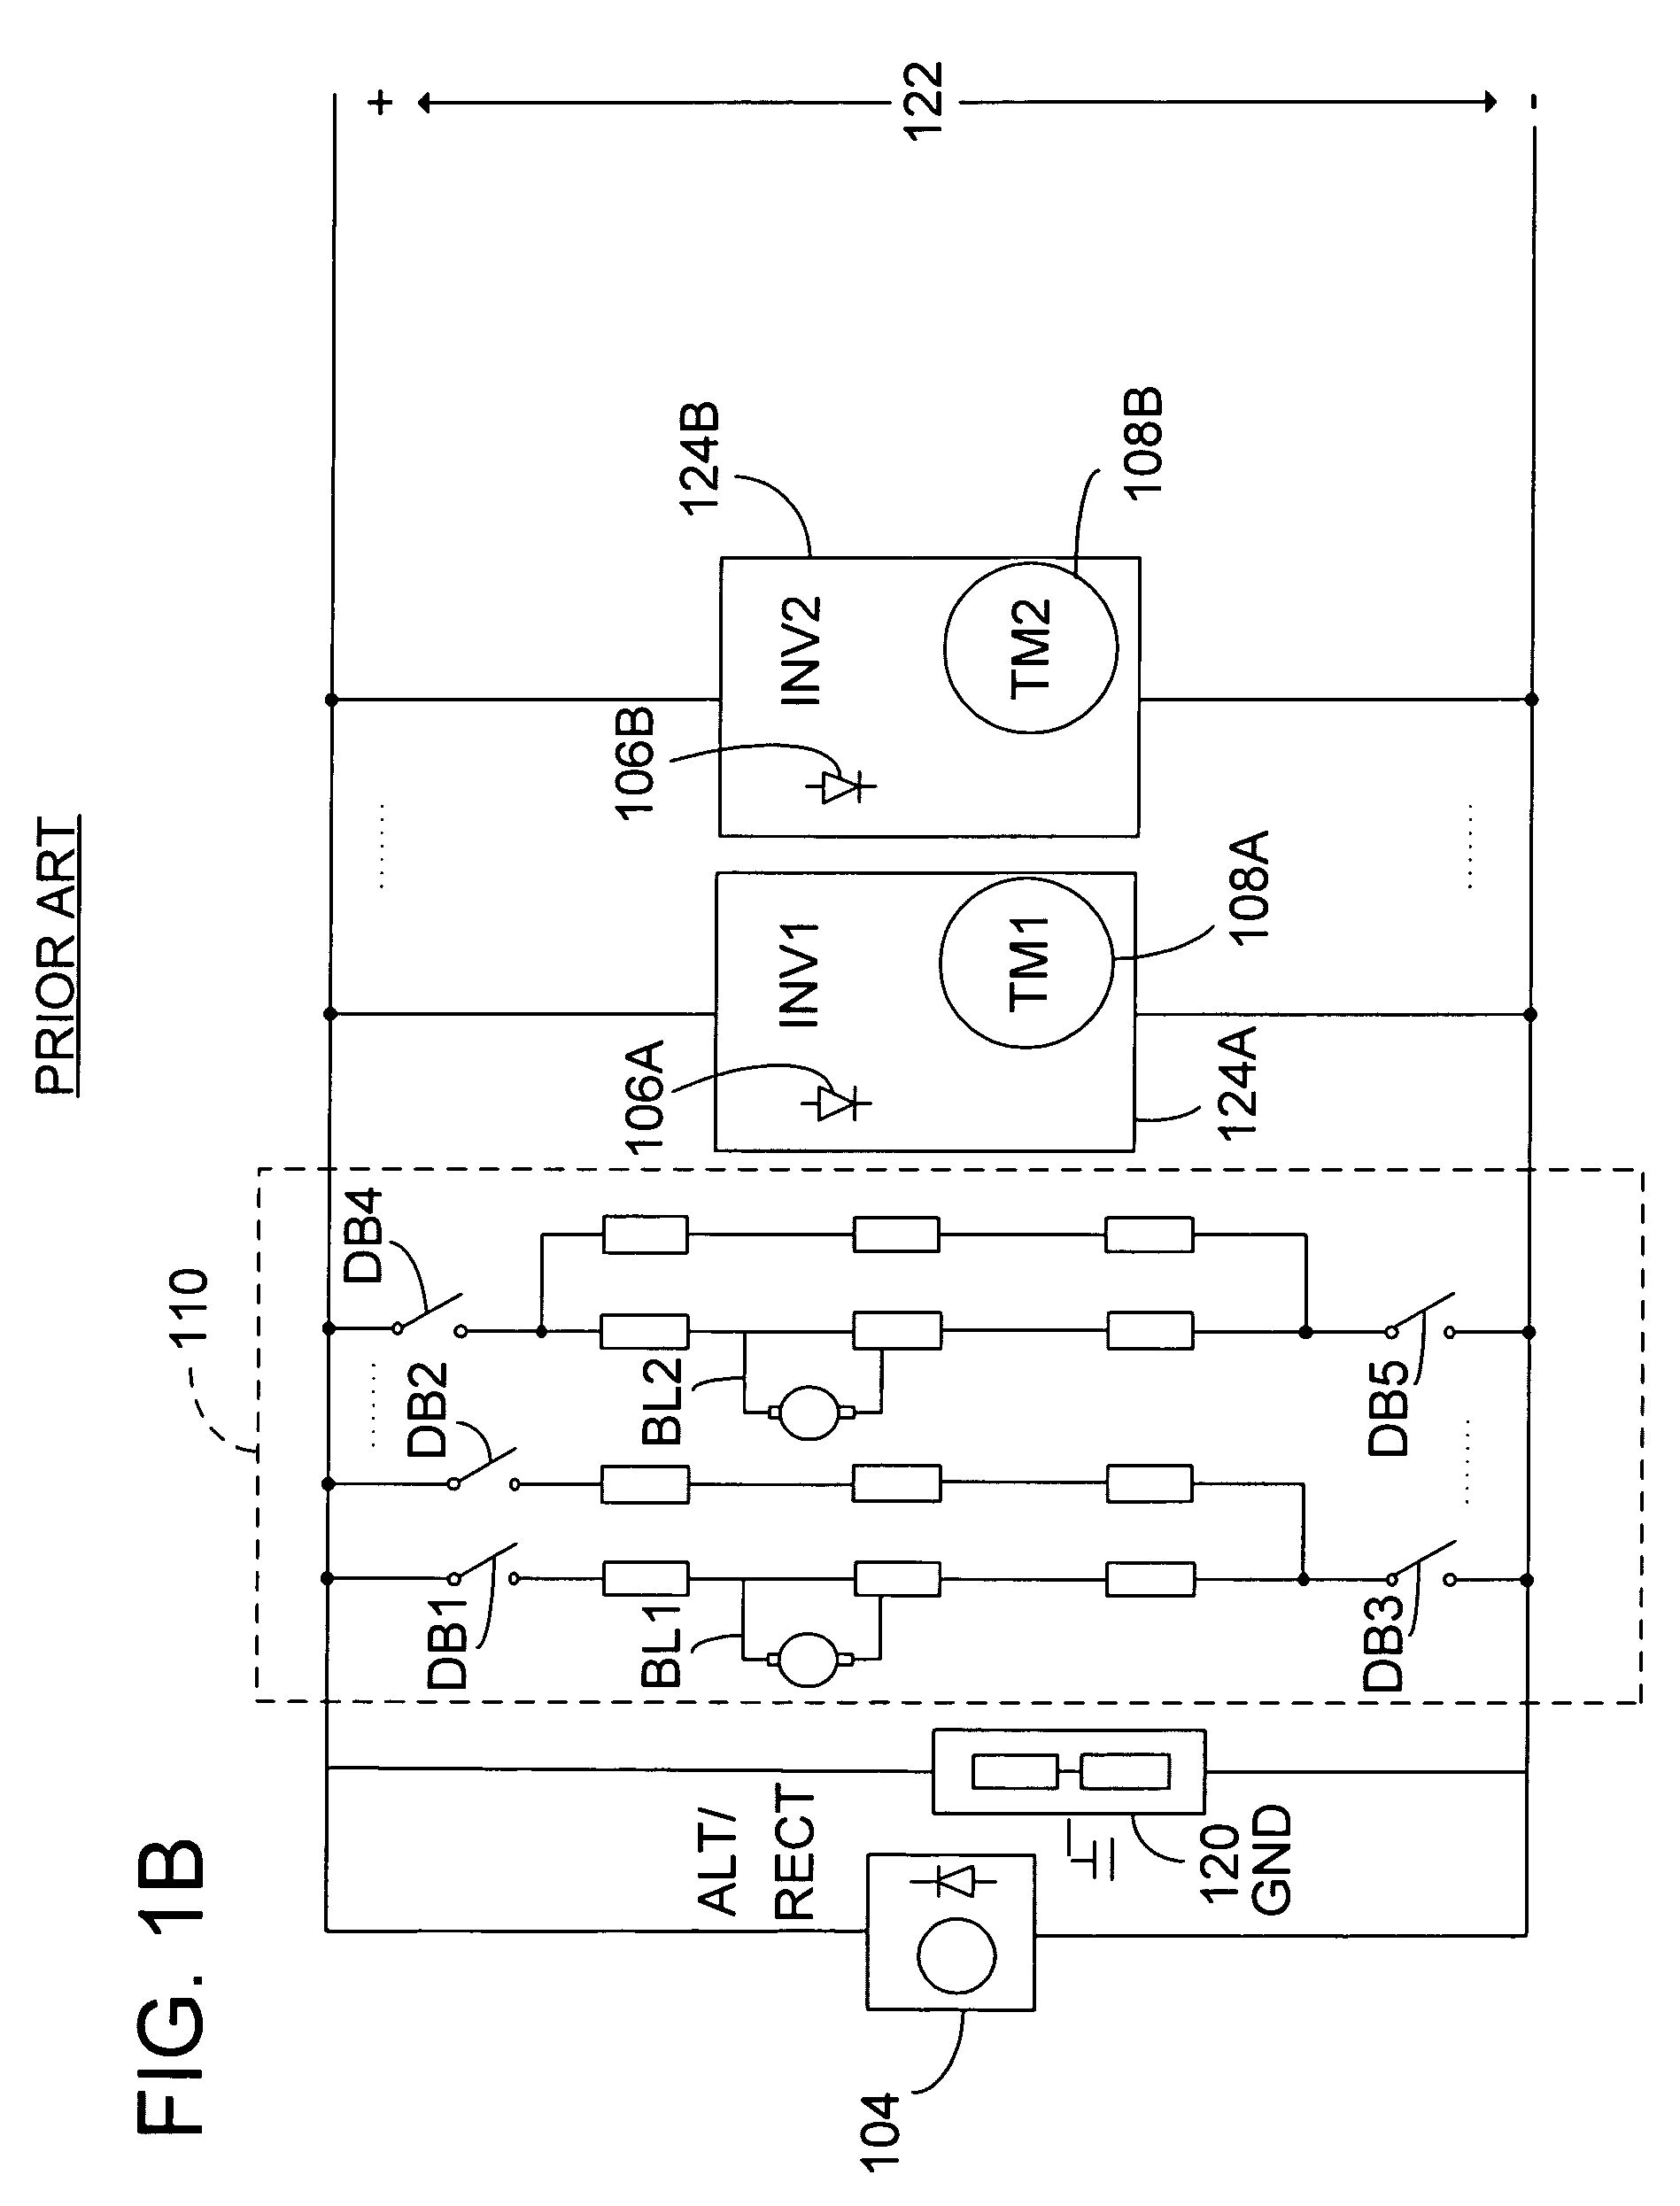 Hybrid energy off highway vehicle load control system and method